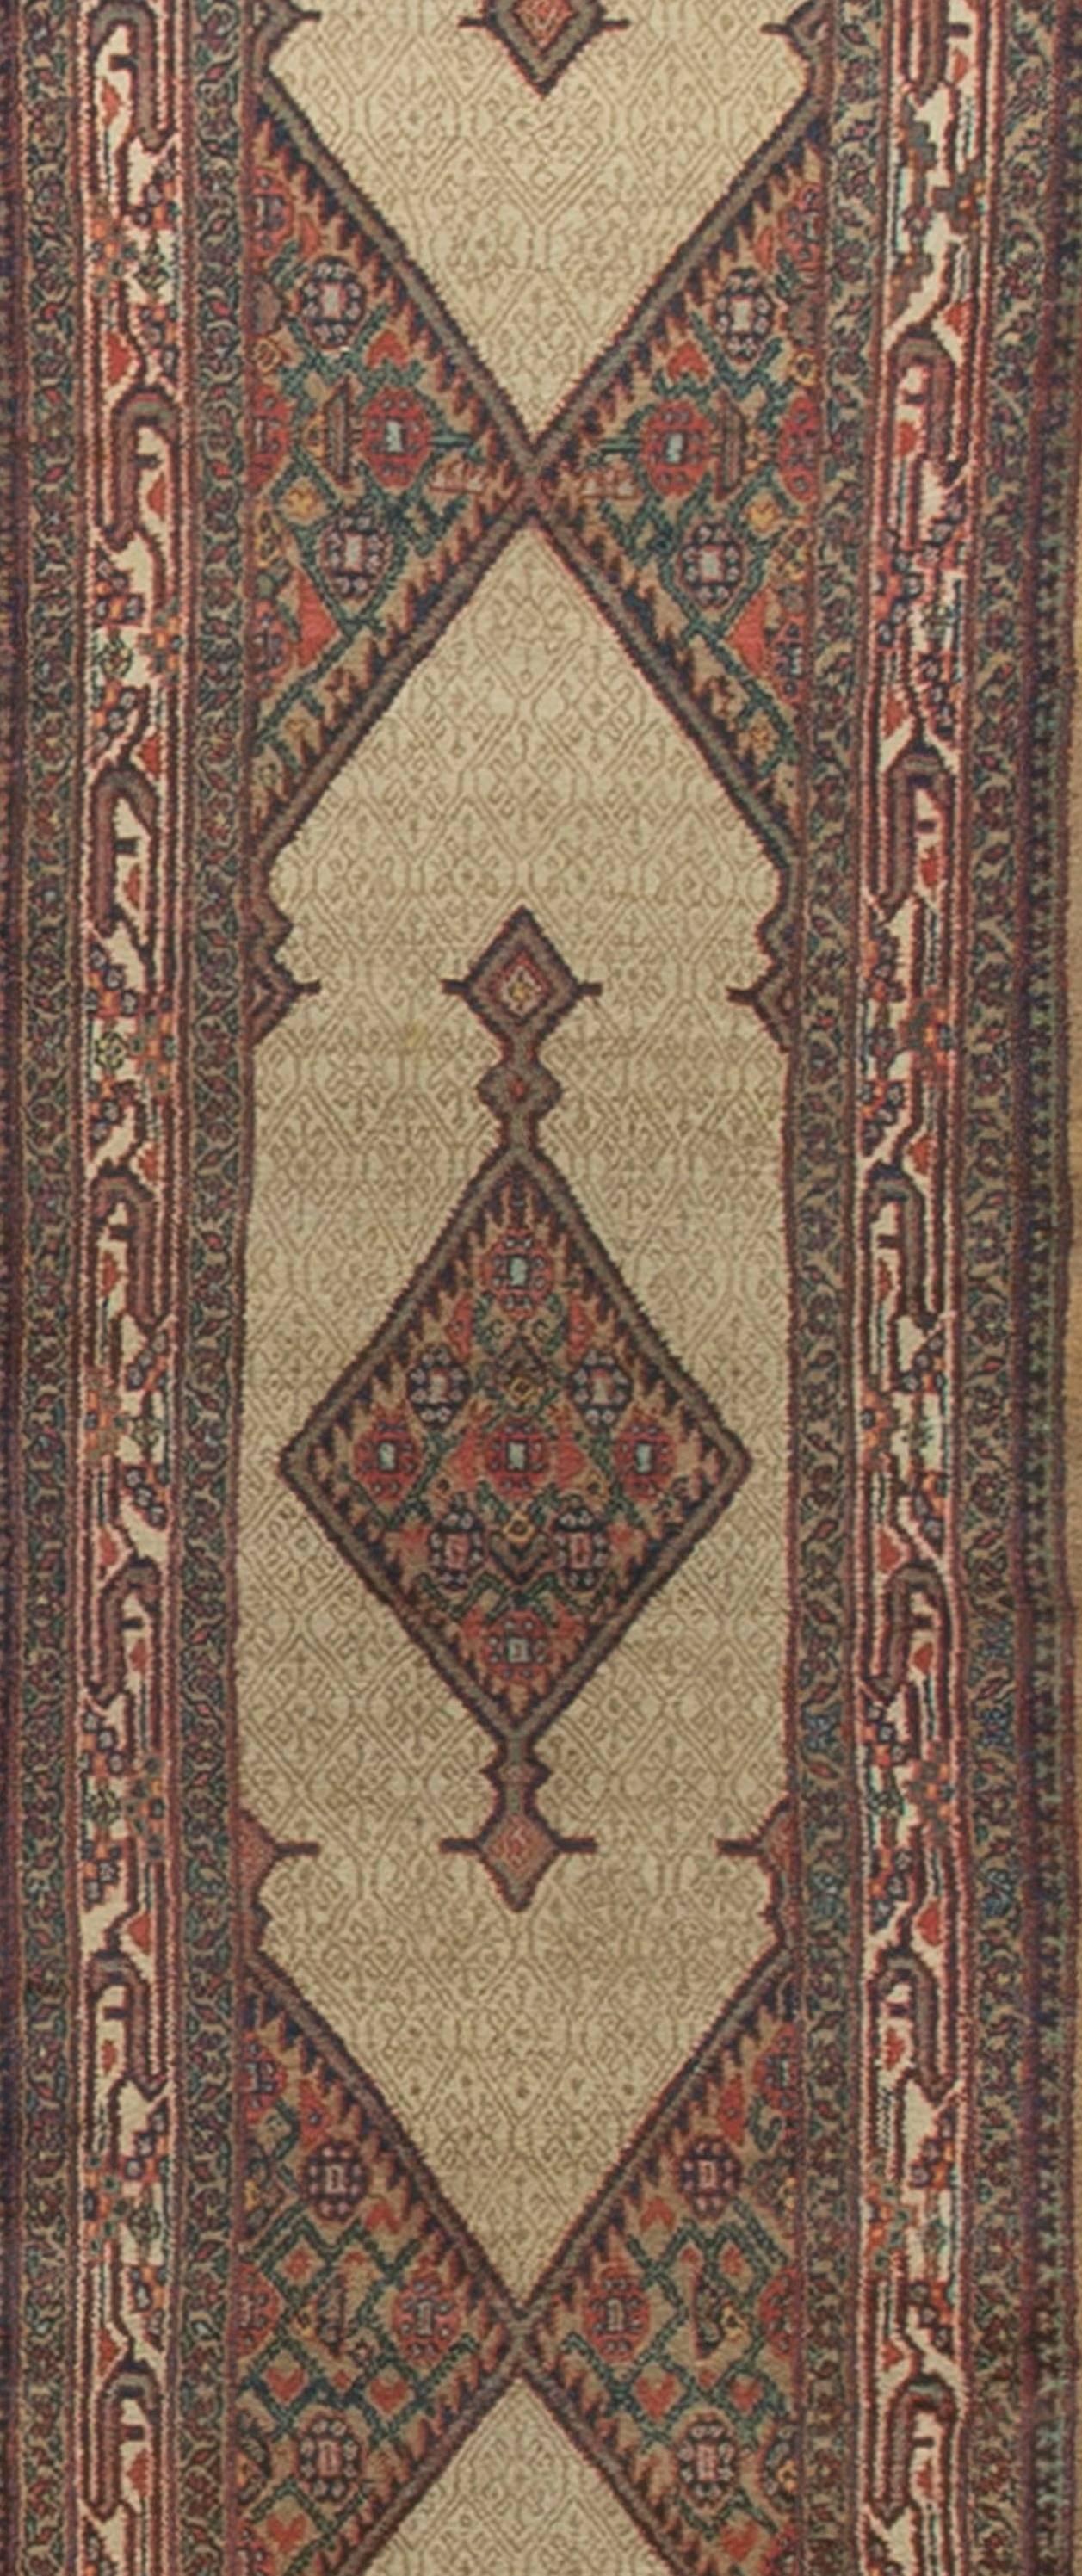 Vintage Persian Serab Camel Hair Runner circa 1930. This runner is woven using camel hair which is strong and resilient. Camel hair rugs are not that typical and are rare to find. They were woven in a handful of tribal area including Serab where